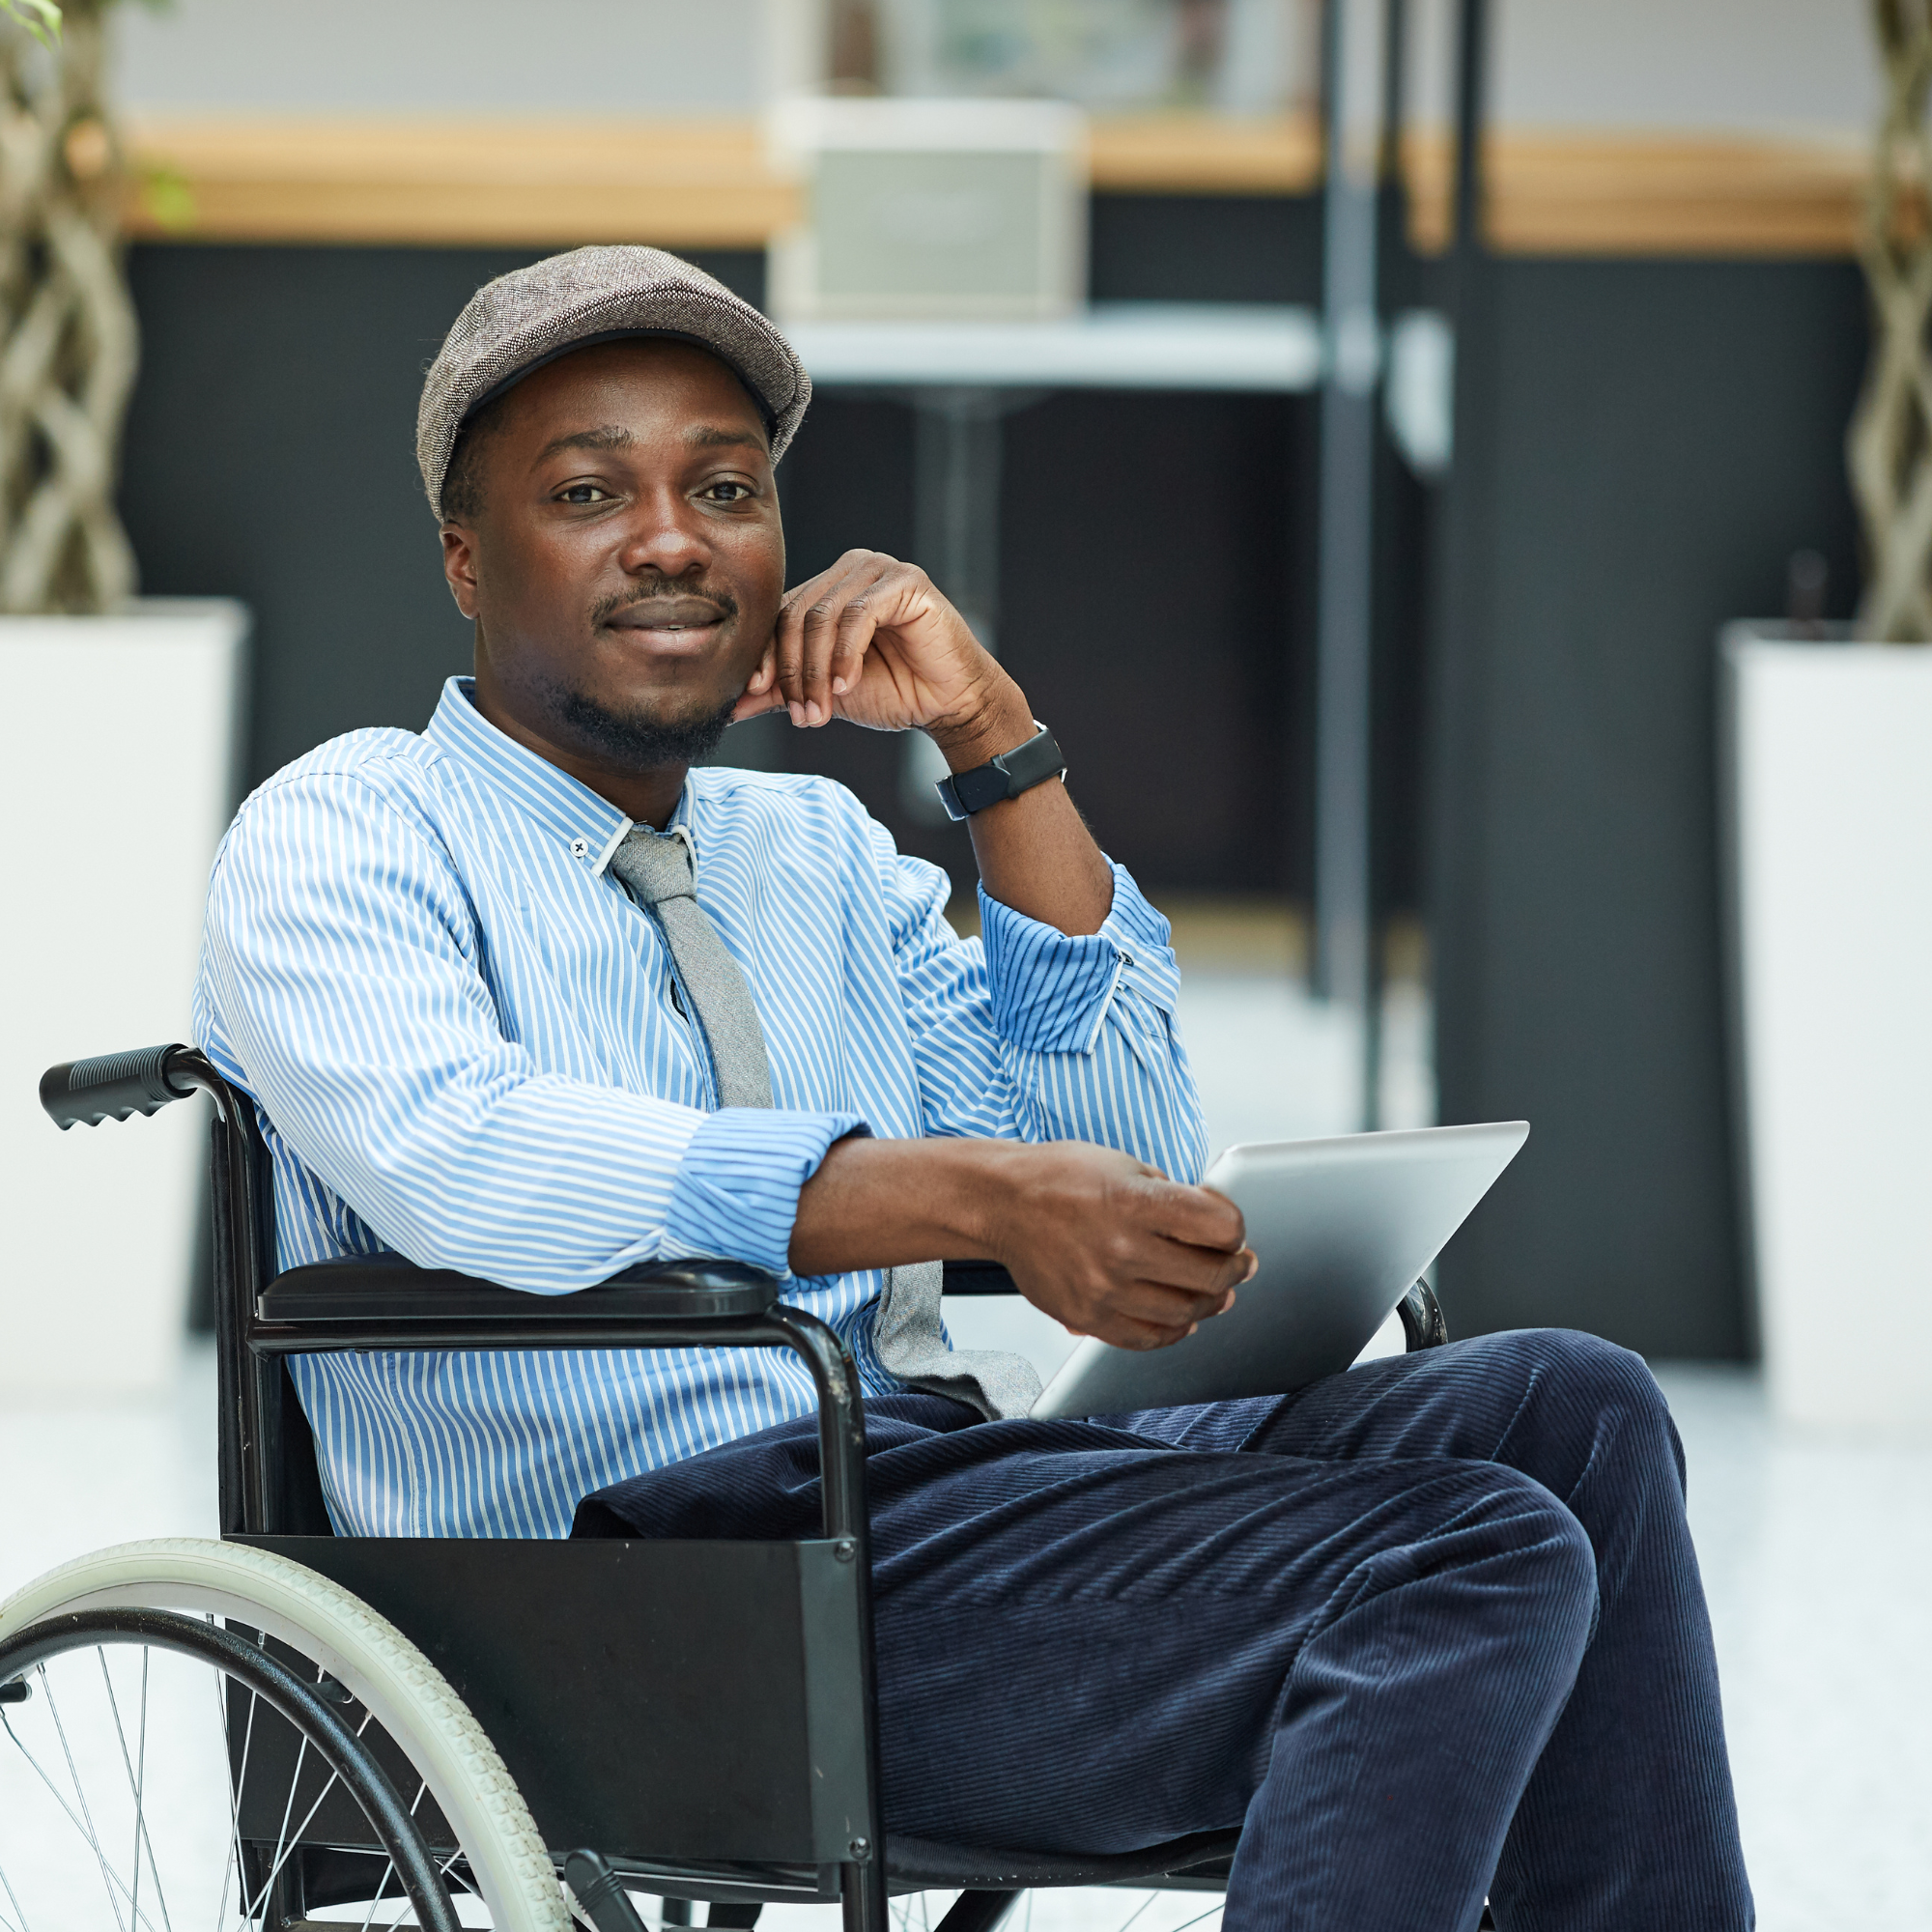 Image of an African American man in a wheelchair holding a tablet and smiling into the camera for the blog "Unconscious Bias Can Affect Hiring Decisions, but What Does It Look Like?"